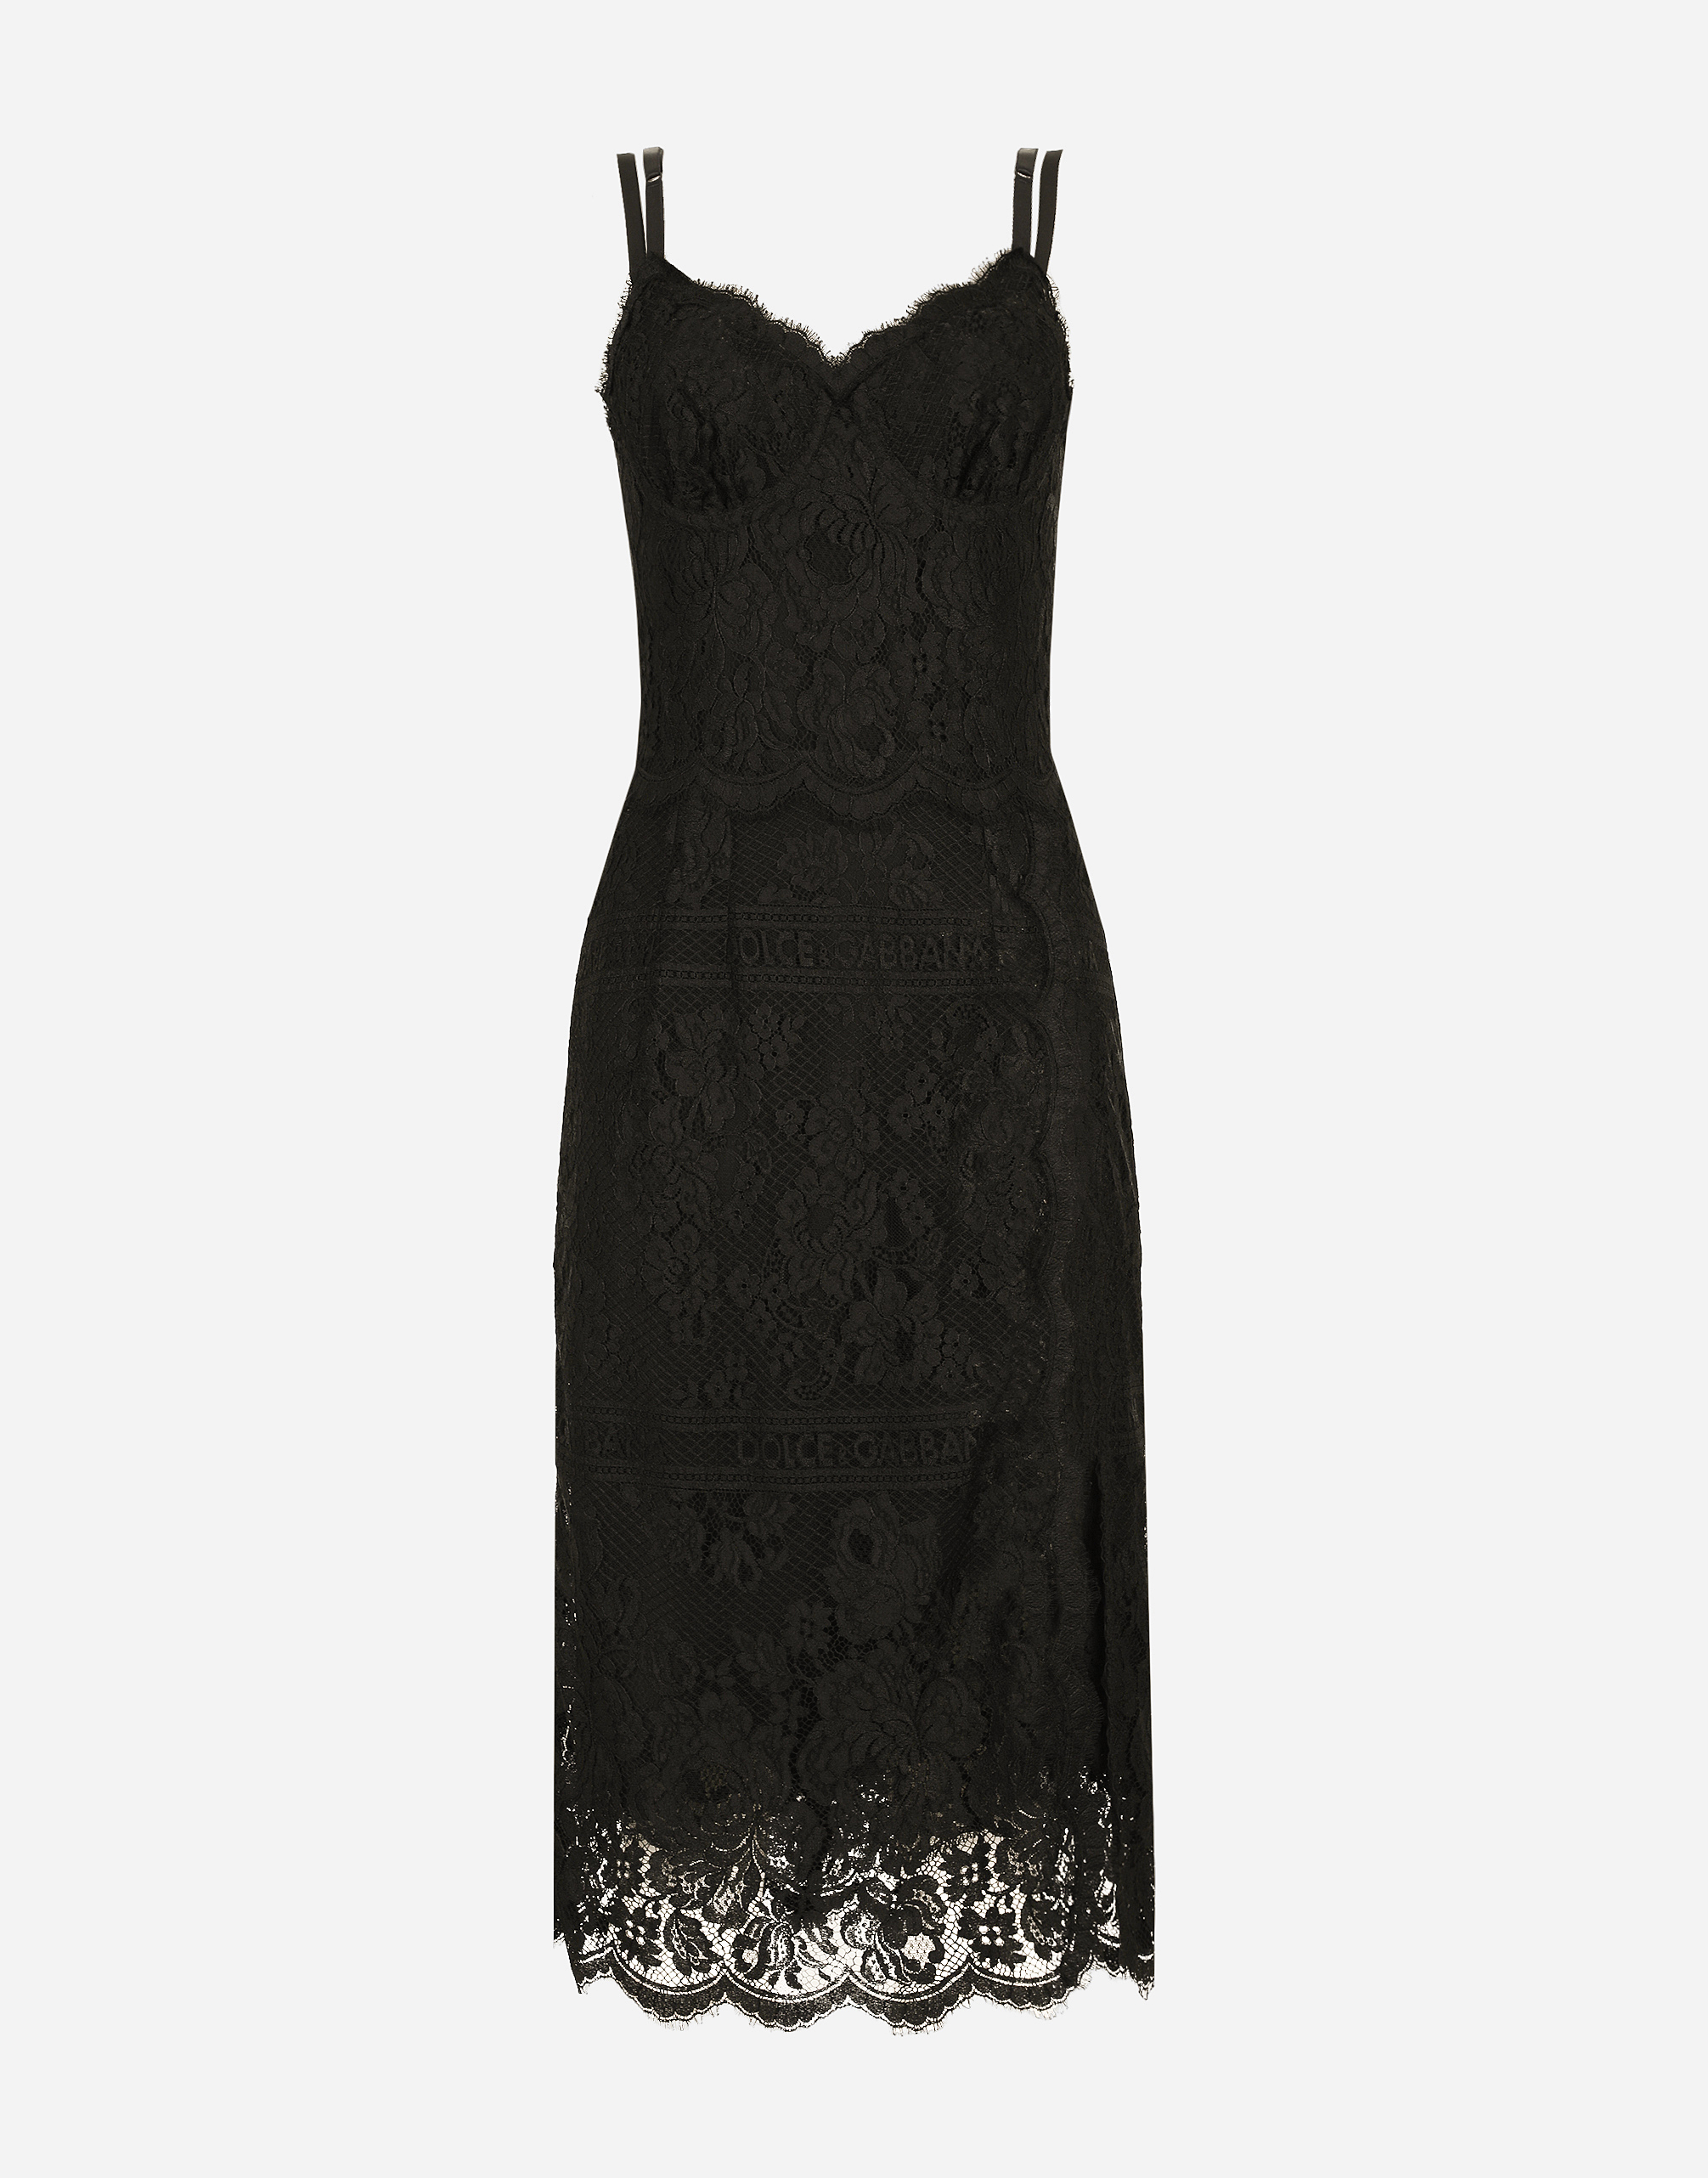 Lace midi dress with double scalloped detailing in Black